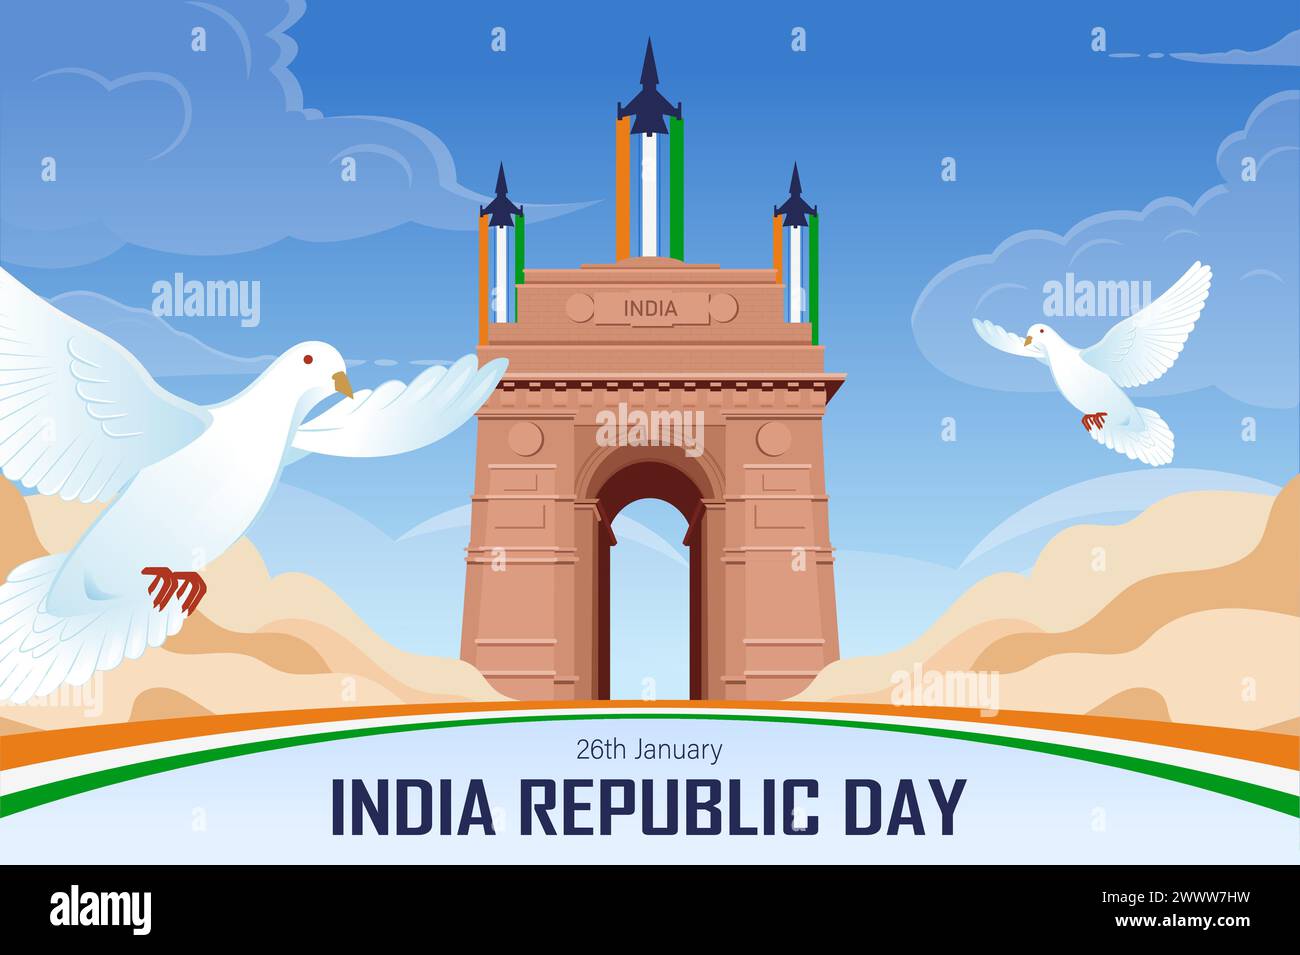 India Republic Day Poster with India Gate Vector Illustration. Stock Vector